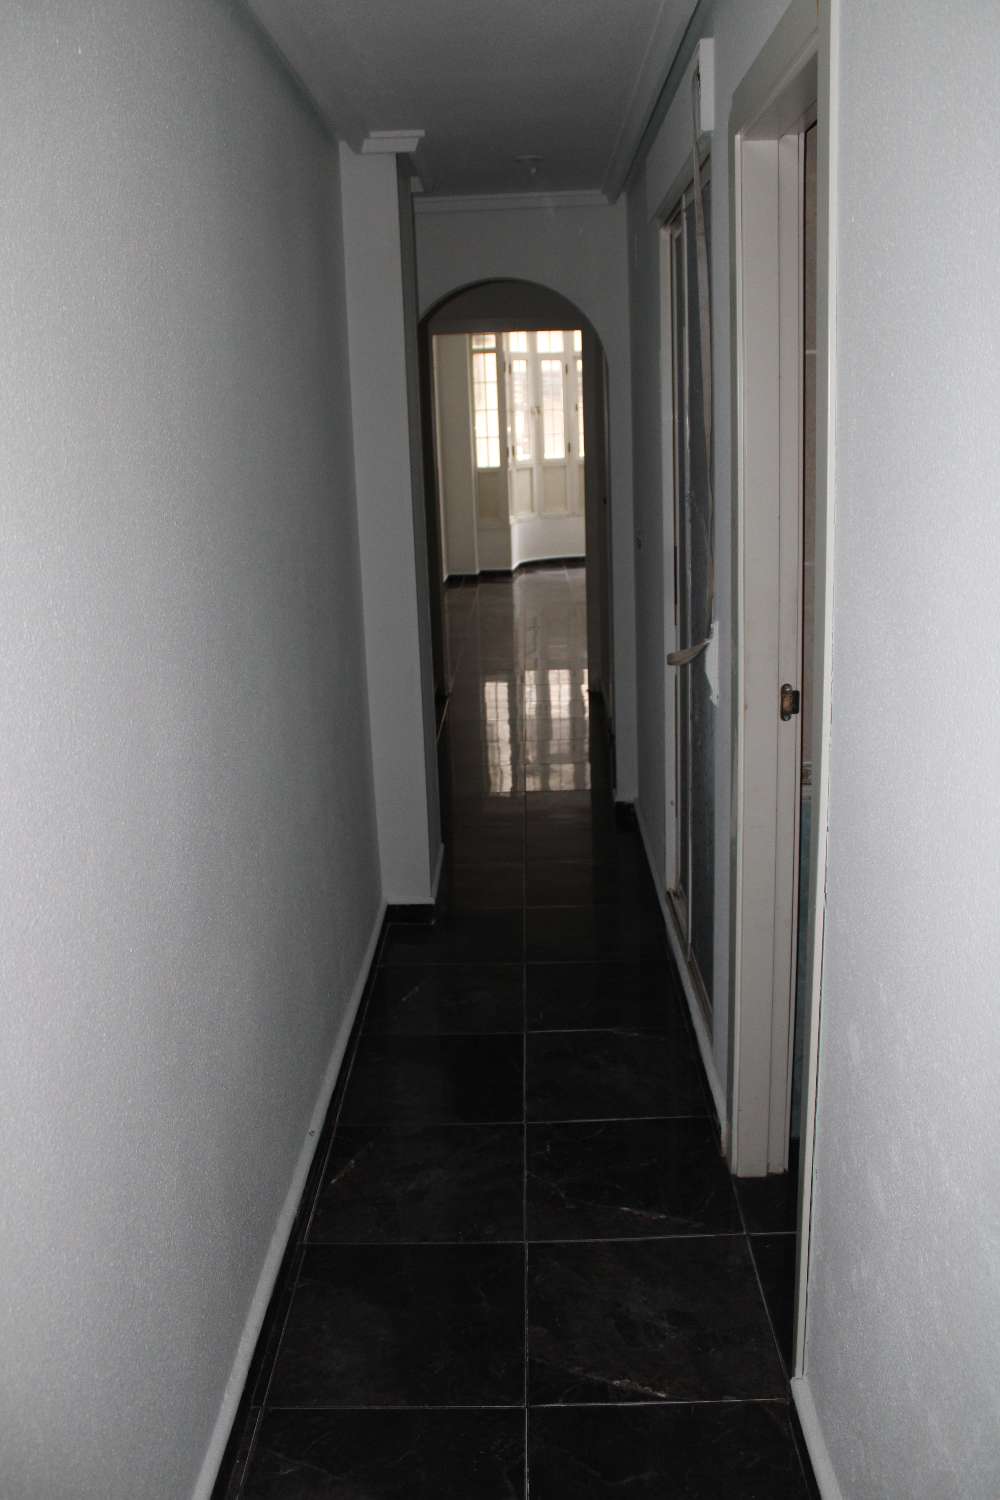 MAKE YOUR OFFER!! 3 BEDROOM 2 BATHROOM APARTMENT IN THE CENTER OF TORREVIEJA!